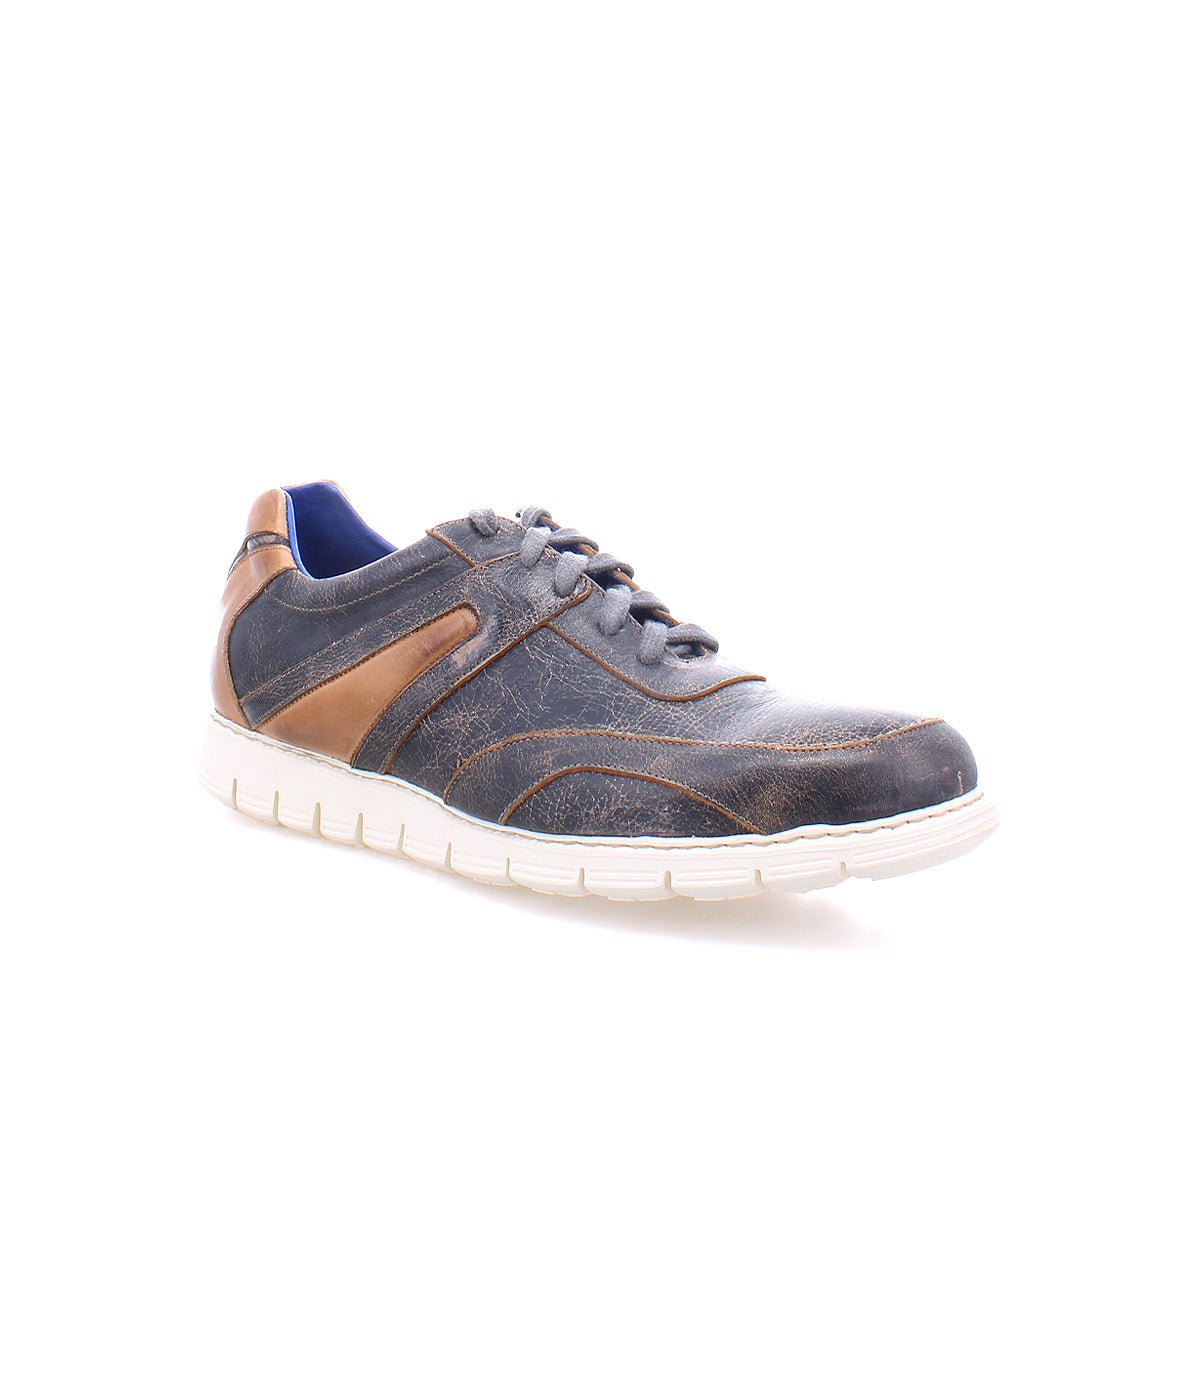 A single distressed dark blue and brown leather lace-up sneaker with white soles, displayed on a white background by Bed Stu's Wardell.